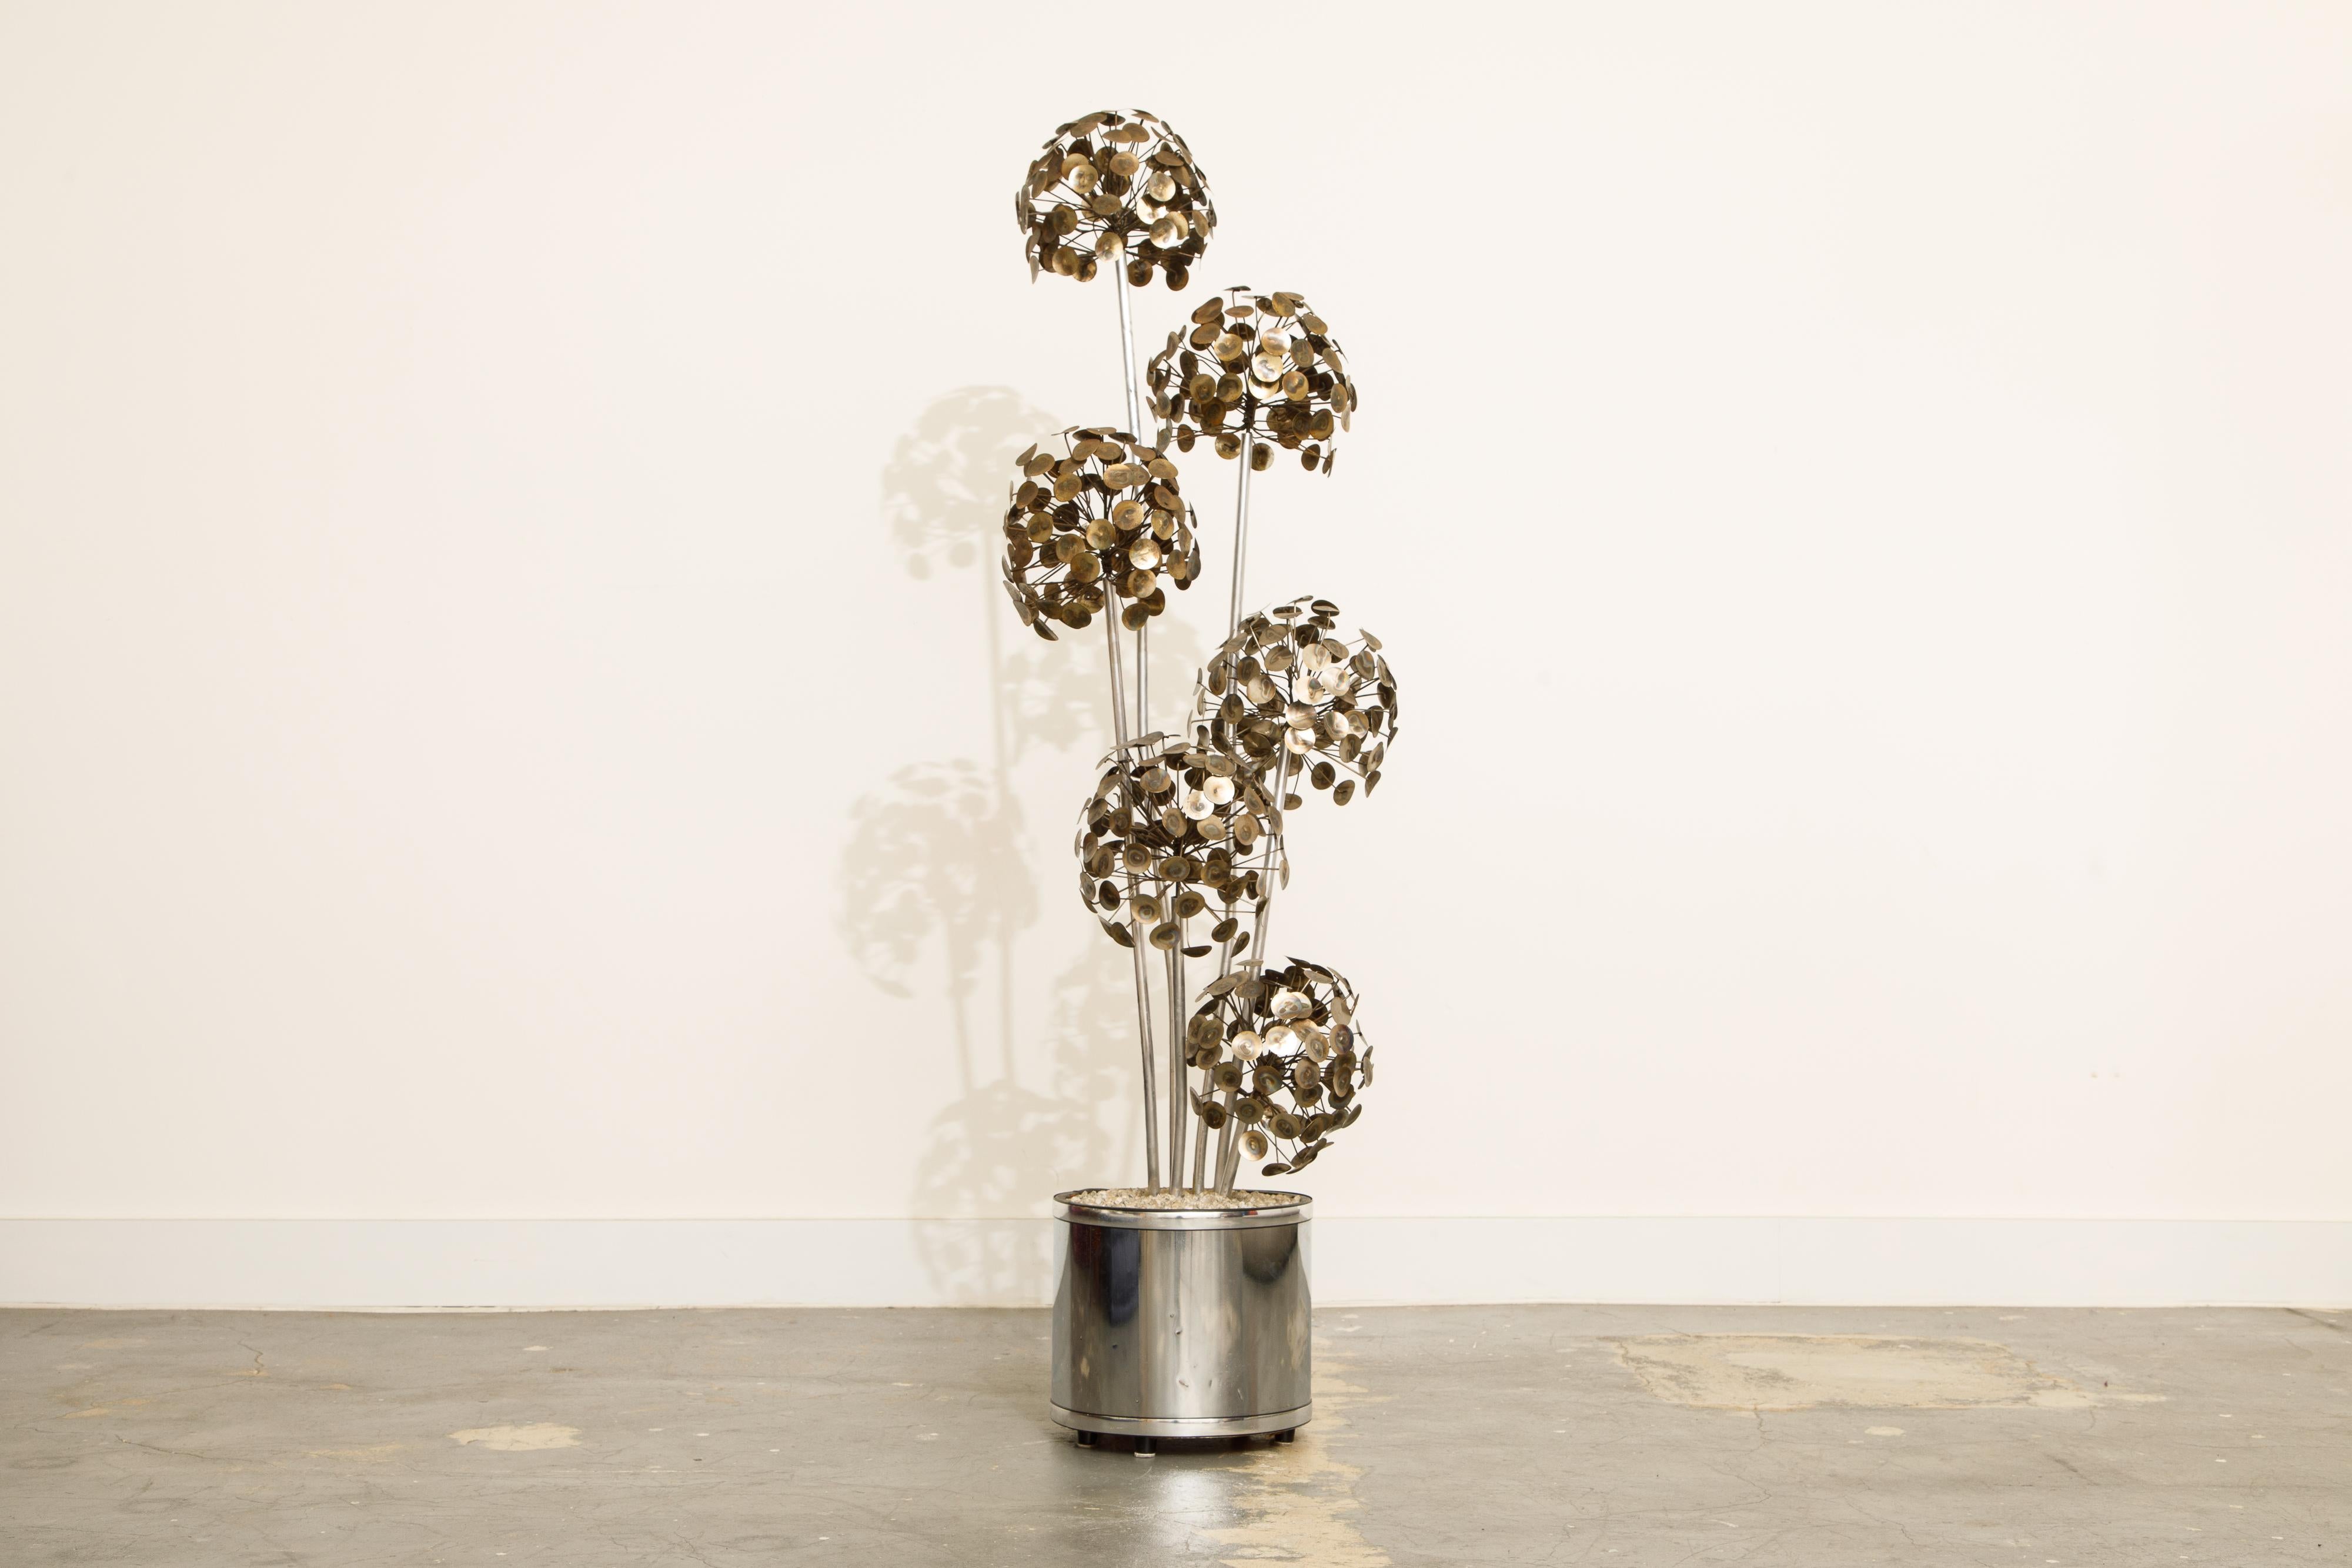 Bring the outside into your interior space with this delightfully whimsical 'Raindrops' tree sculpture, which displays the creativity and craftsmanship C. Jere were well-known for (also, you don't have to prune or water it, which is a bonus). Curtis